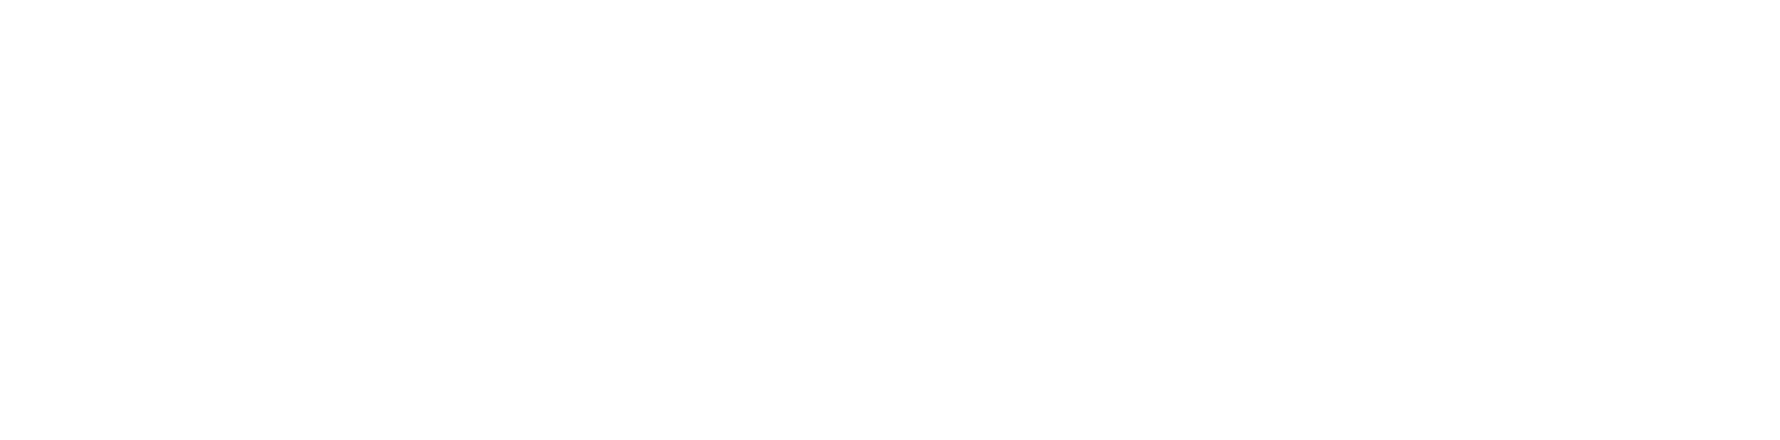 Green Party of England & Wales